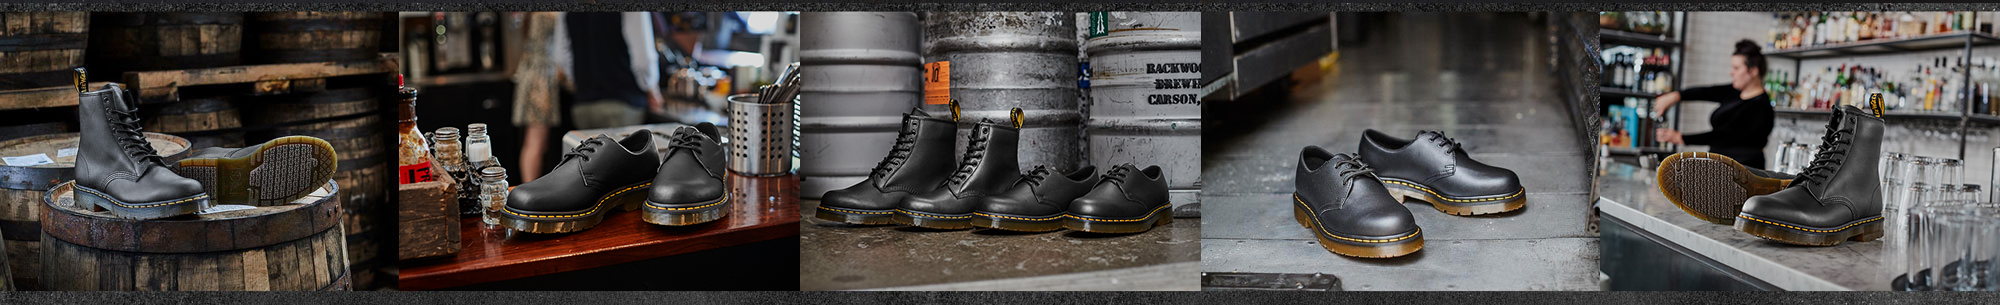 https://drmartens.a.bigcontent.io/v1/static/lp-slip-resistant-footer-black-shoes-aw22wk30